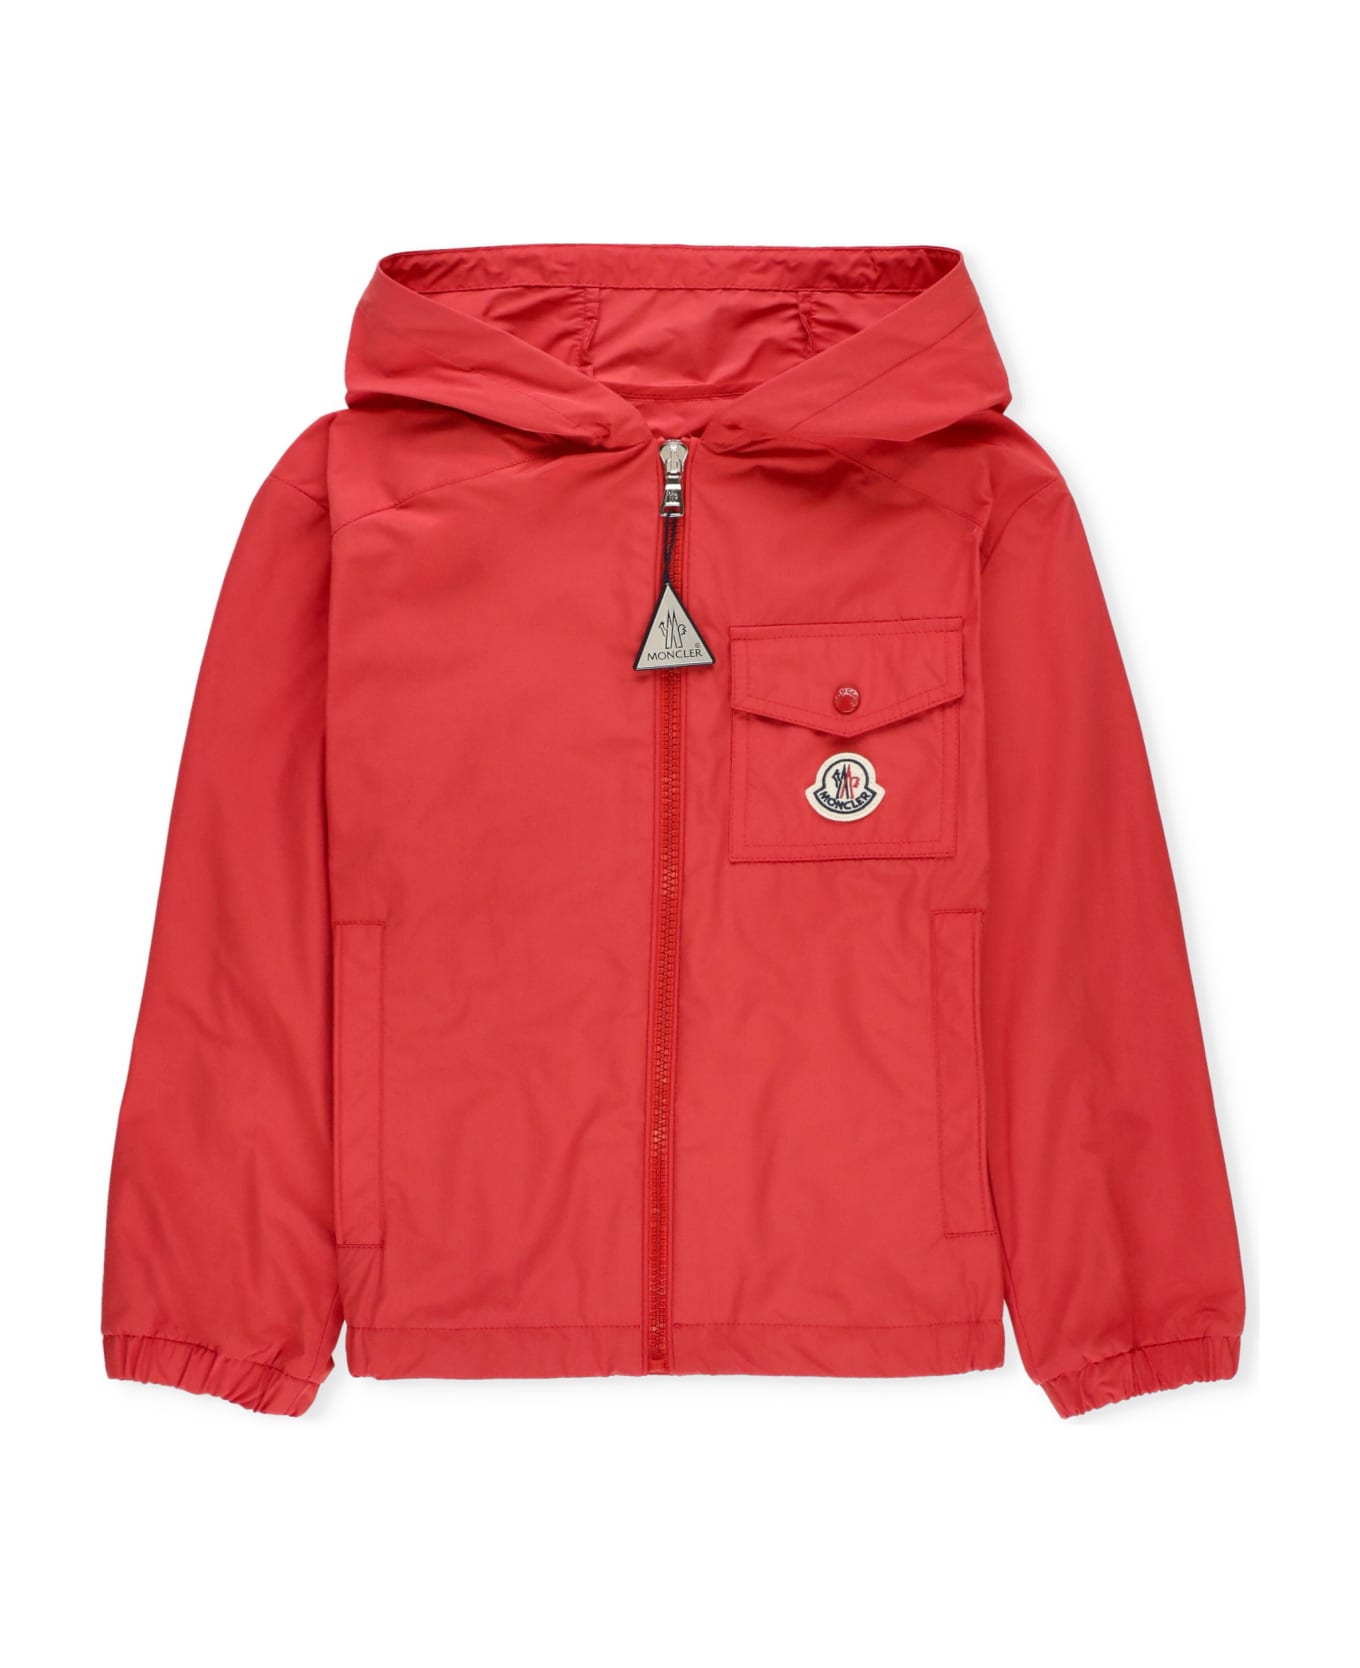 Moncler Jacket With Logo - Red